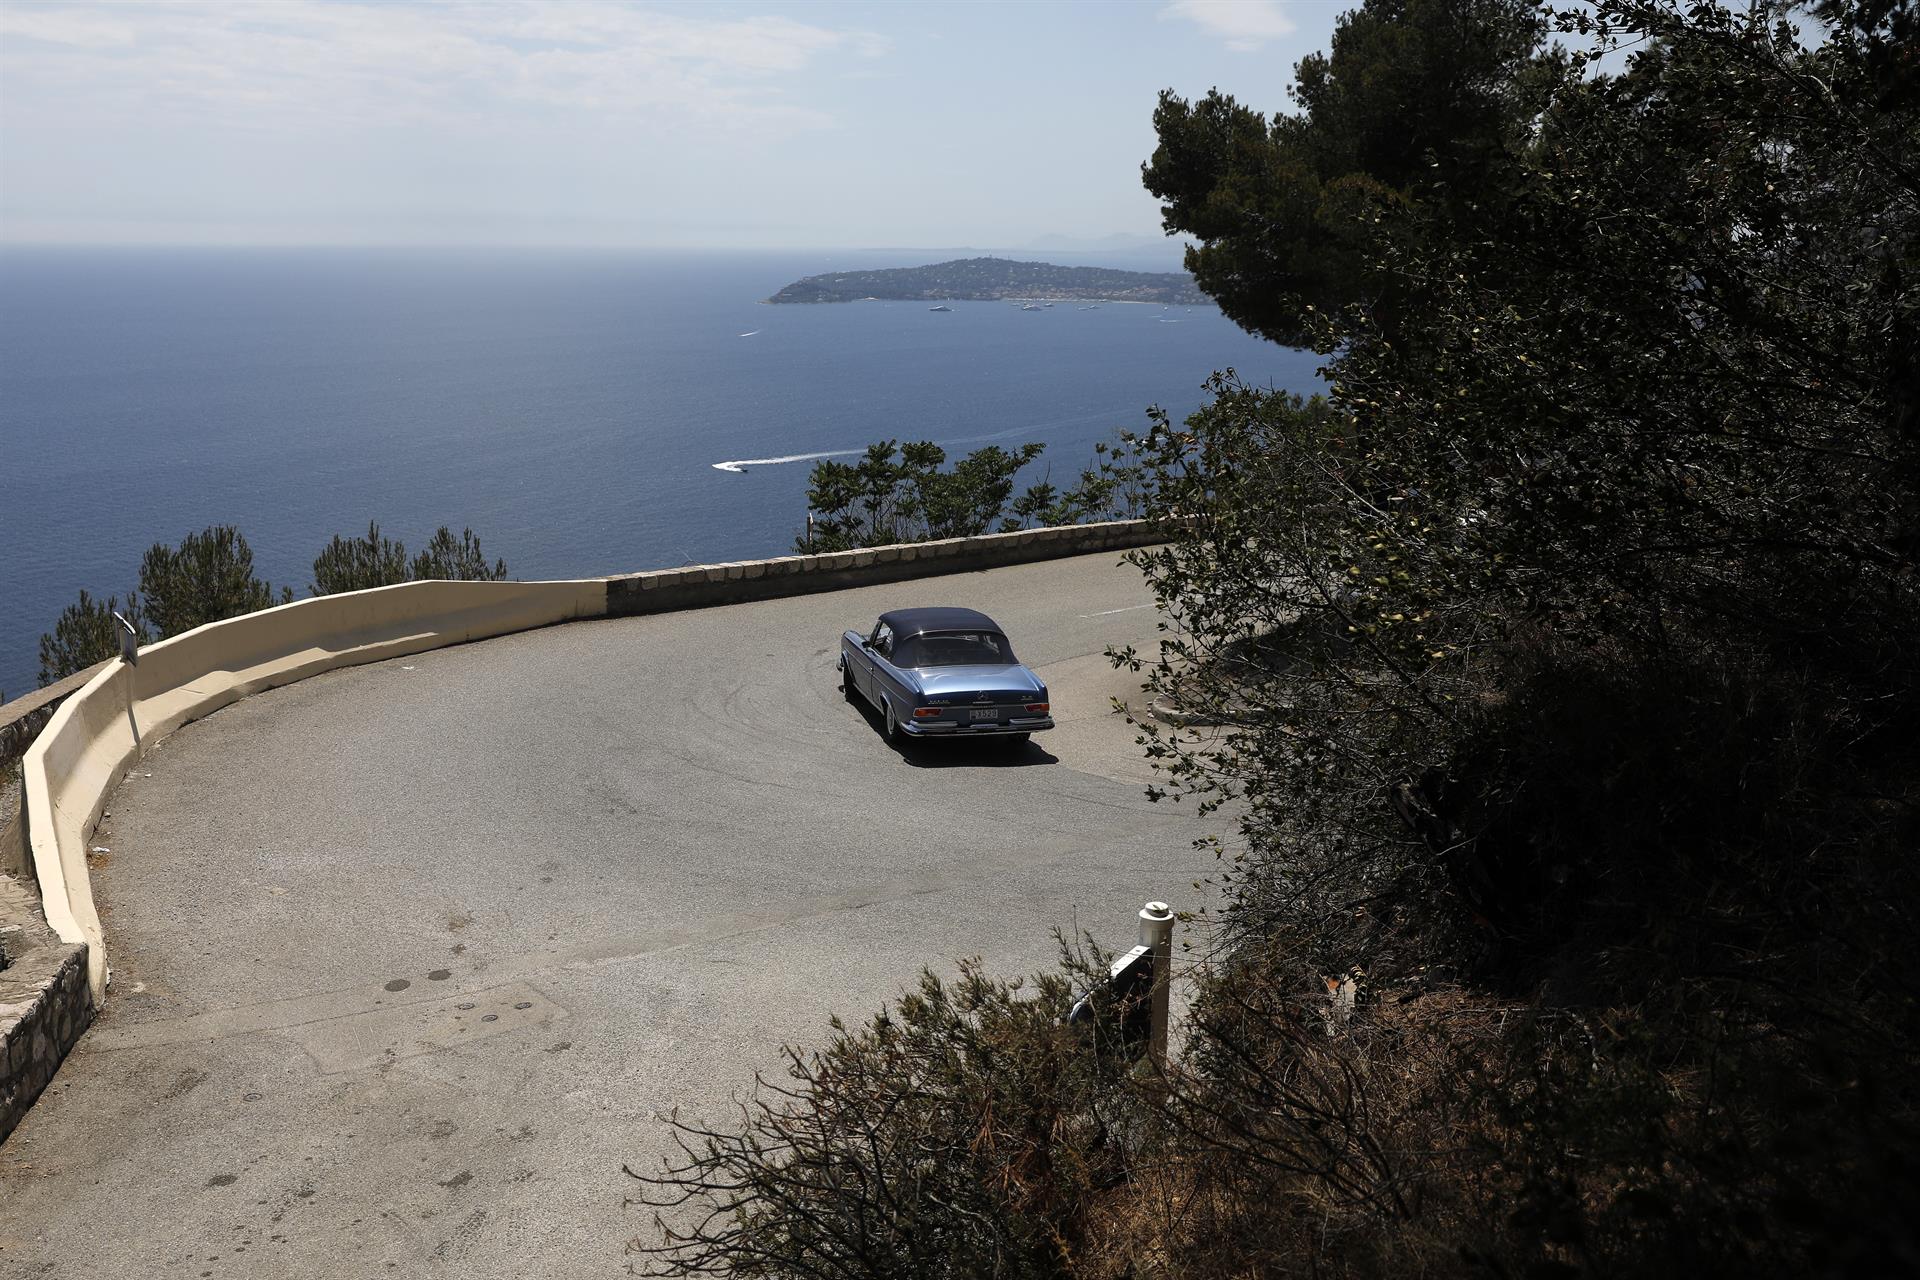 A view of the place where US actress Princess Grace Kelly, on 14 September 1982 was killed in an car accident in La Turbie, France, near Monaco, 14 June 2022 (issued 10 September 2022). EFE/EPA/SEBASTIEN NOGIER
